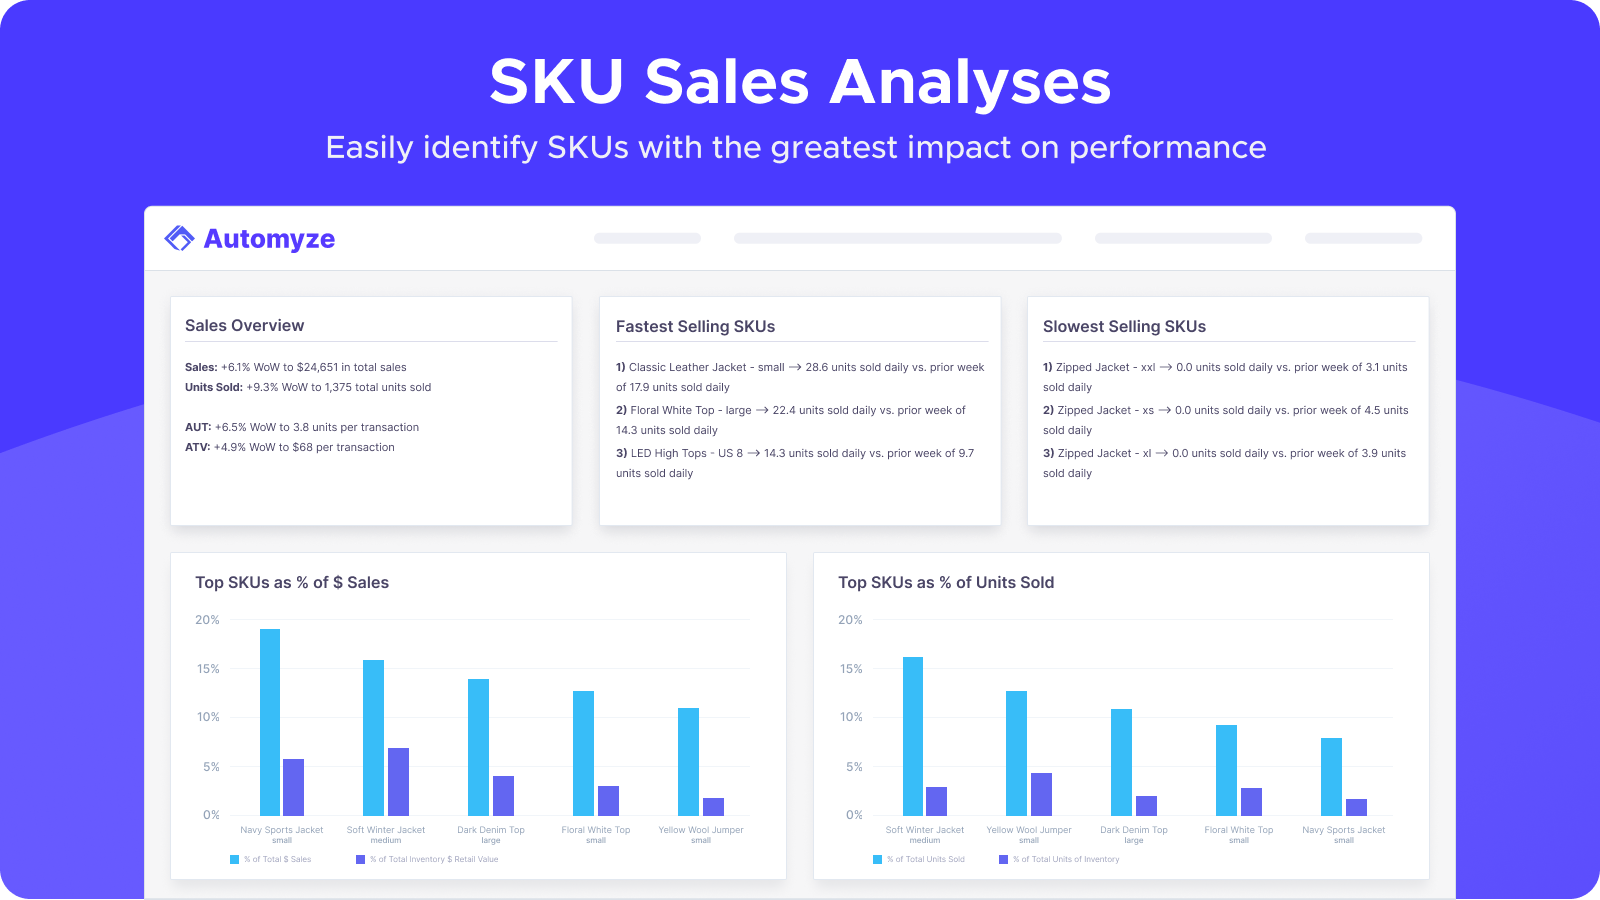 Easily identify SKUs with the greatest impact on performance.